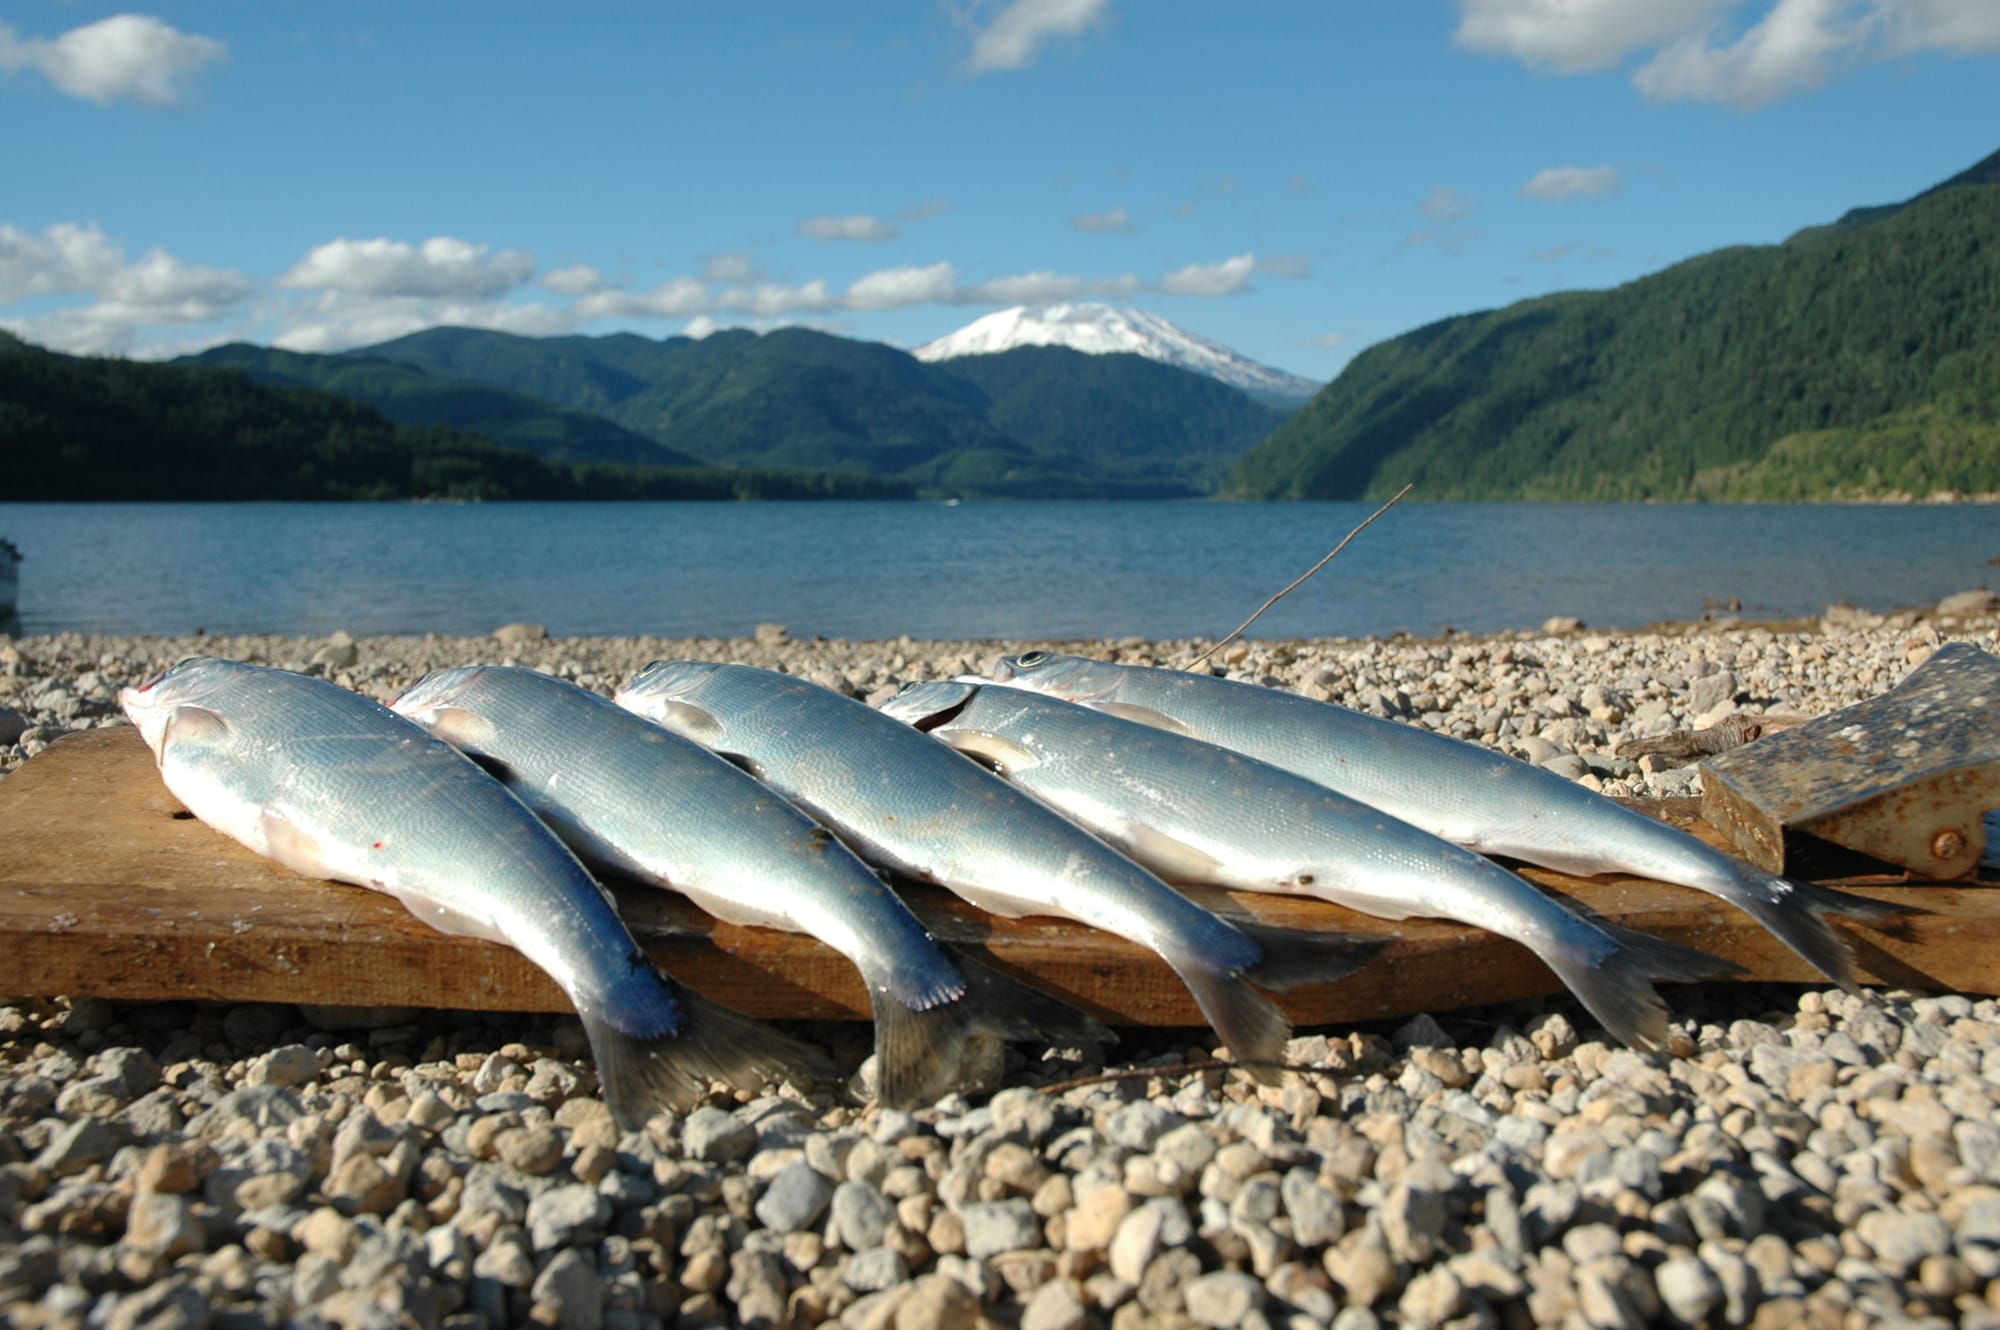 These kokanee were caught three years ago in Yale Reservoir on the North Fork of the Lewis River (ALLEN THOMAS/The Columbian)